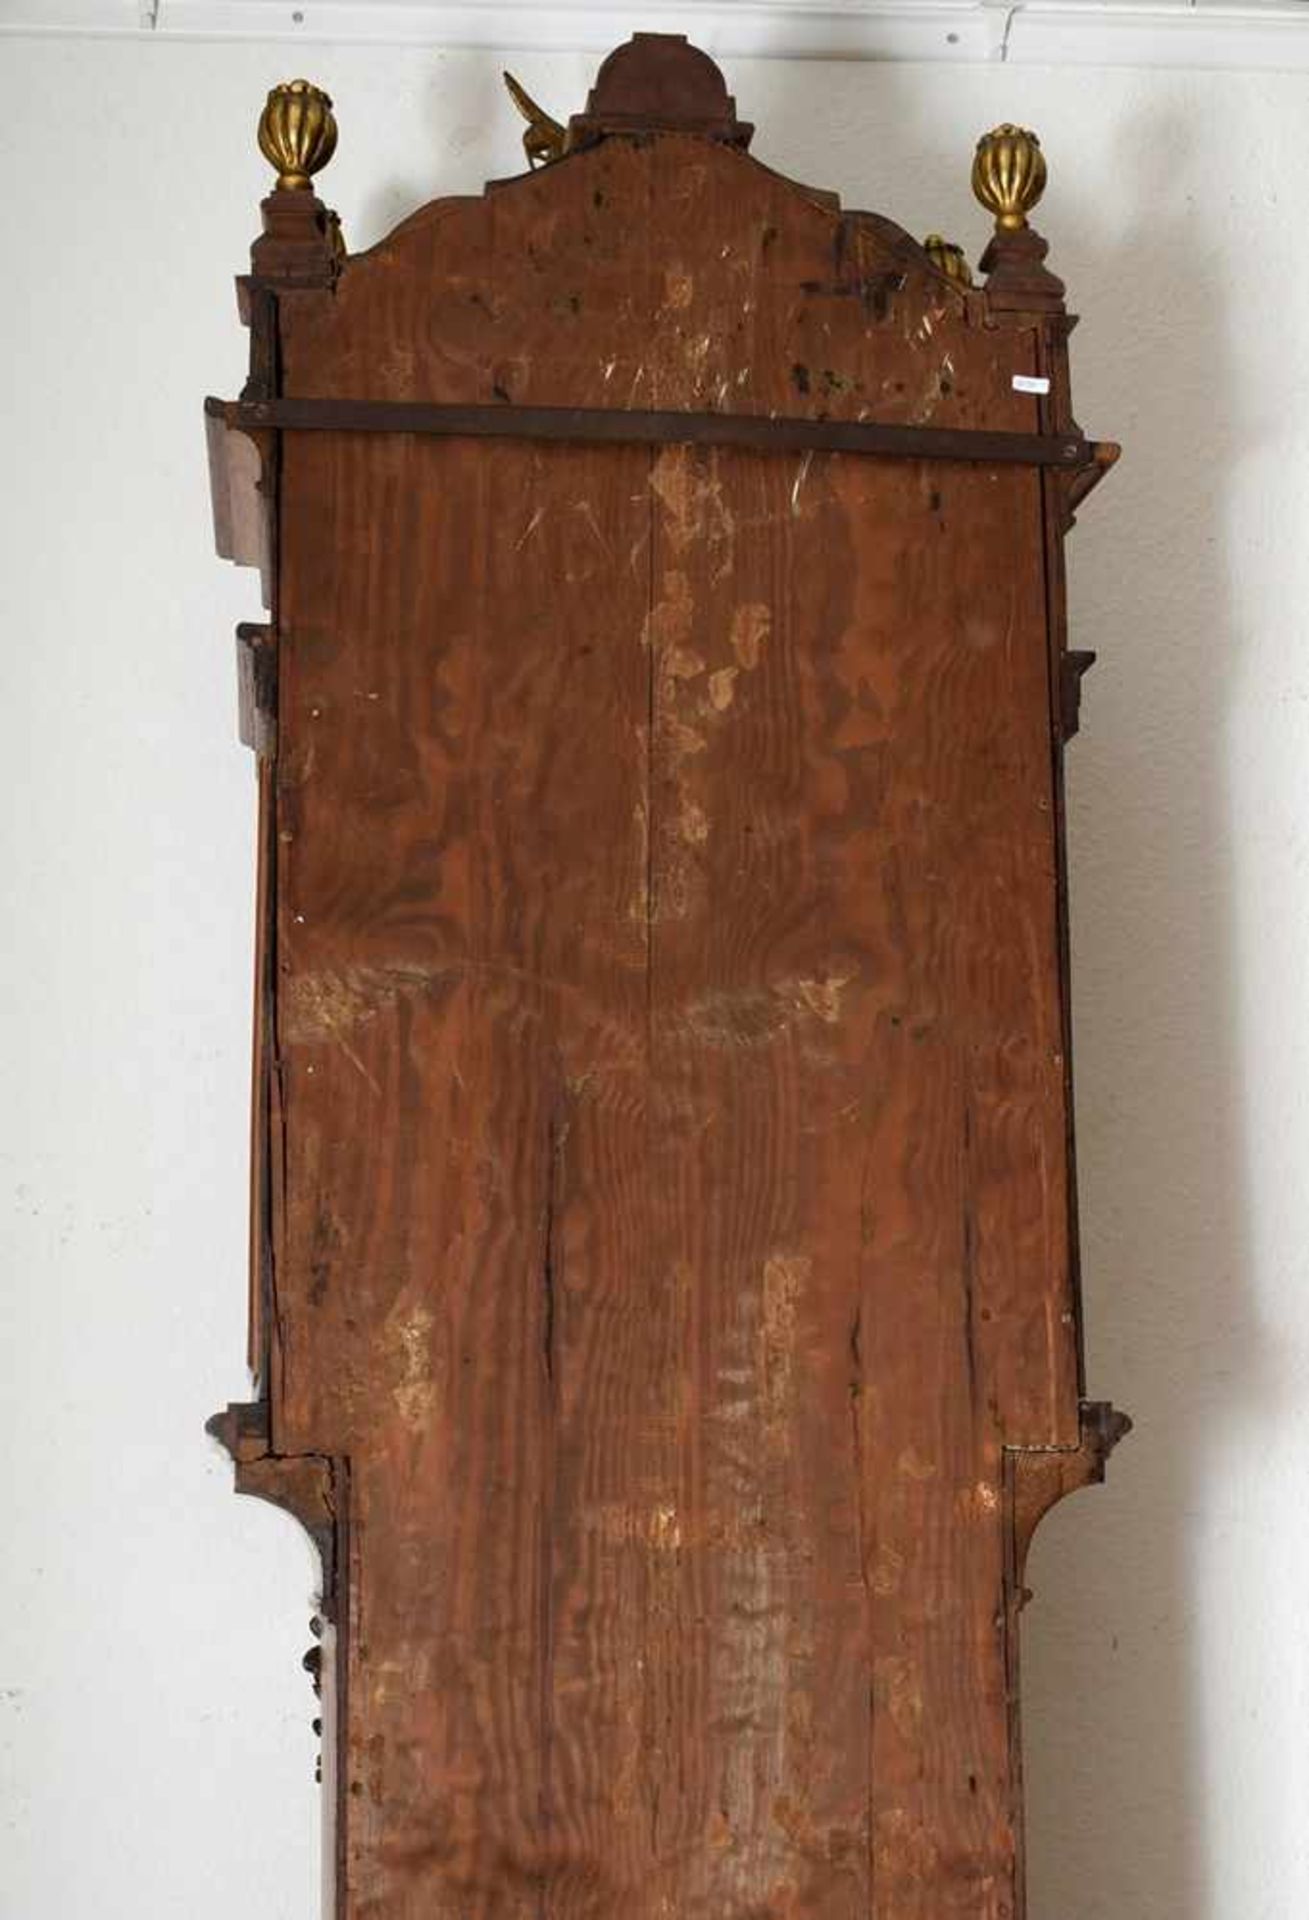 Large rococo grandfather clock with figural ivory inlays and rocaille carvings, walnut veneer, 8-day - Image 9 of 17